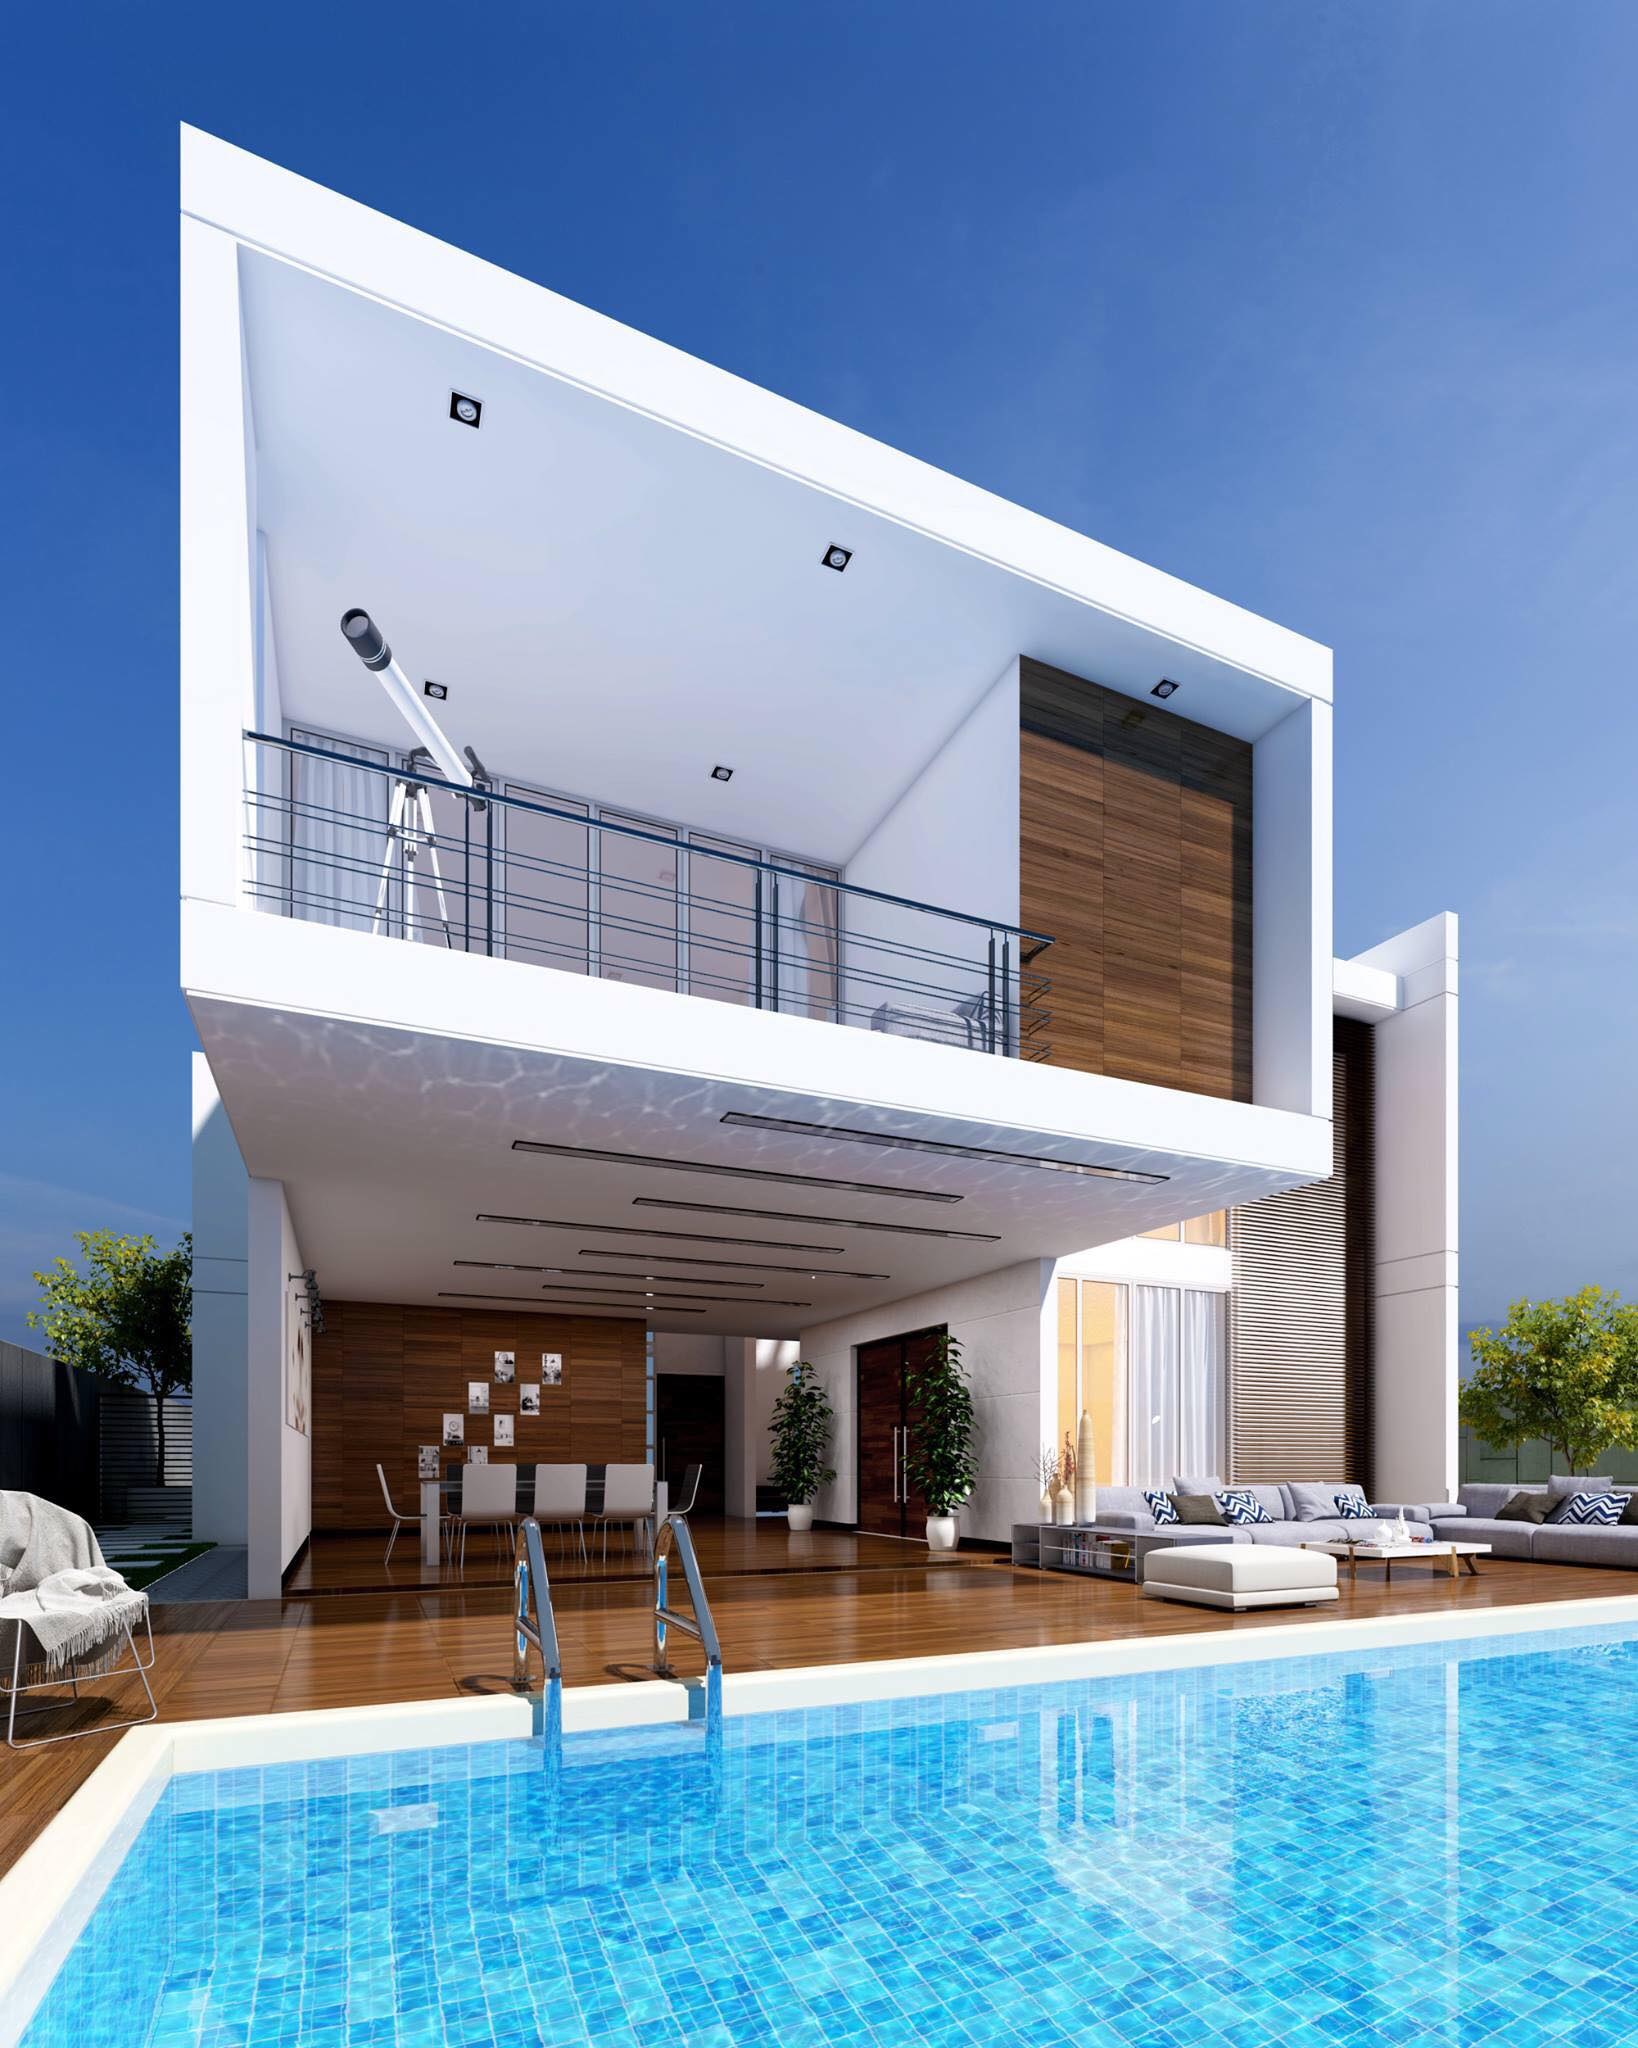 3ds max house model free download